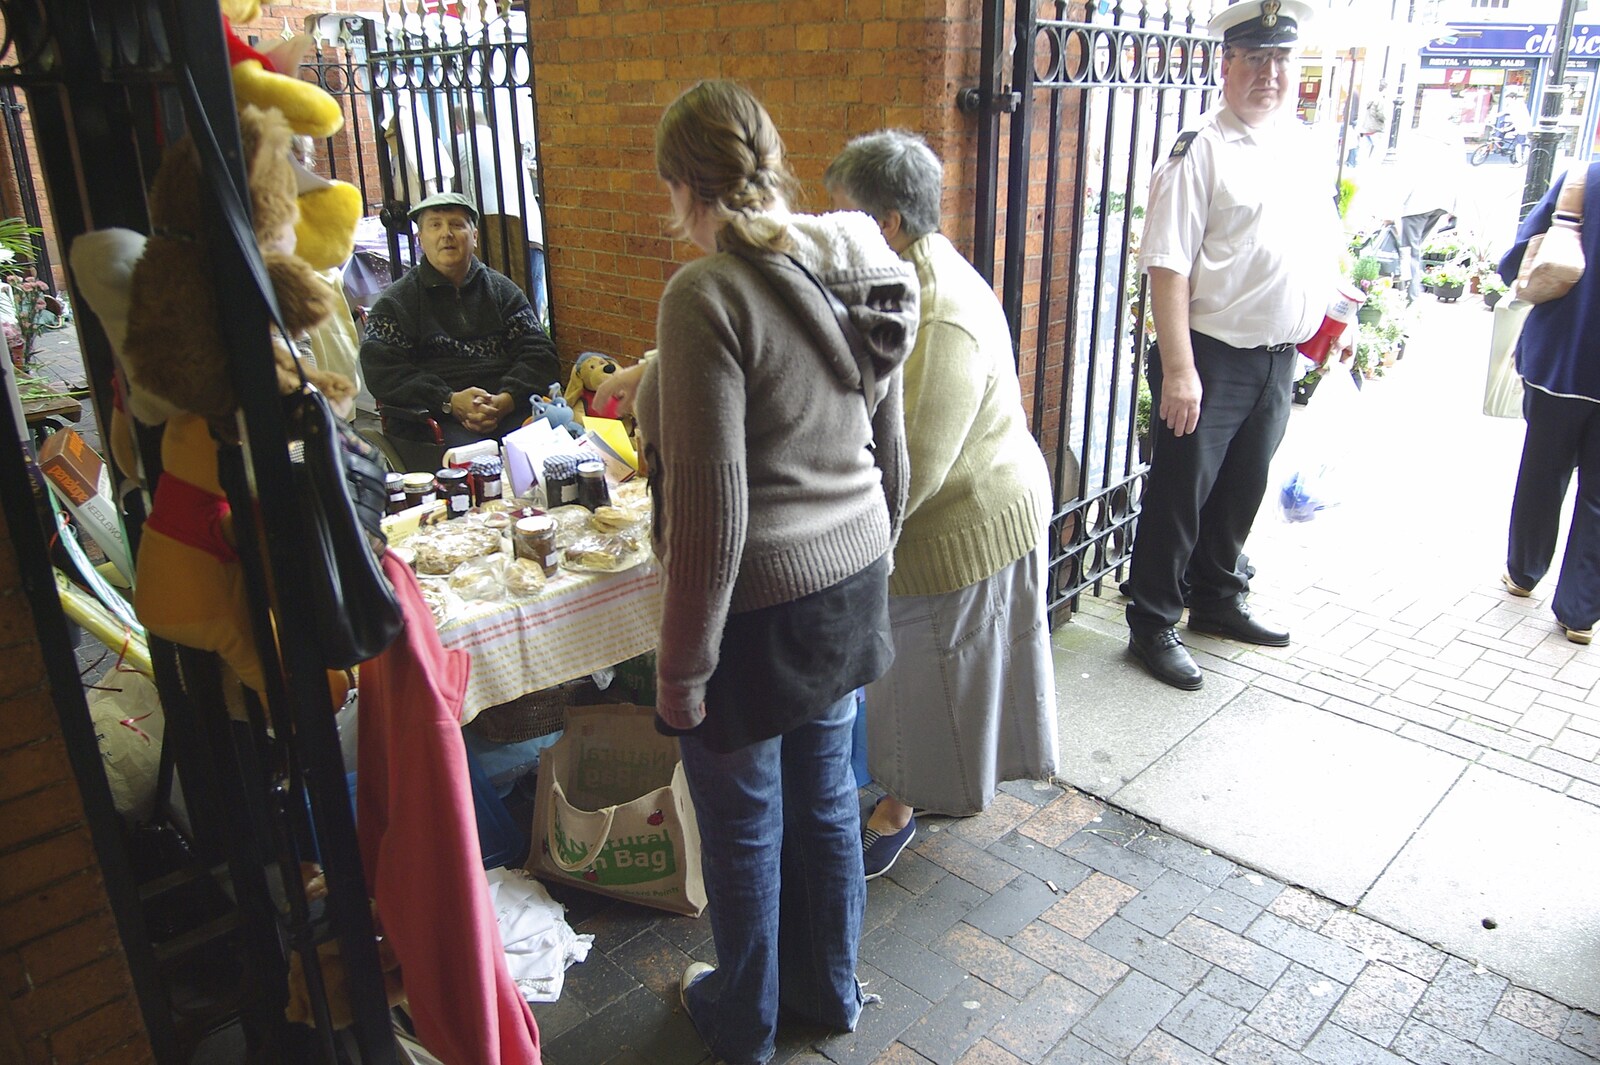 A Road Trip to Ireland Via Sandbach and Conwy, Cheshire and Wales - 21st September 2007: Isobel scopes out a WI stall in Sandbach Market